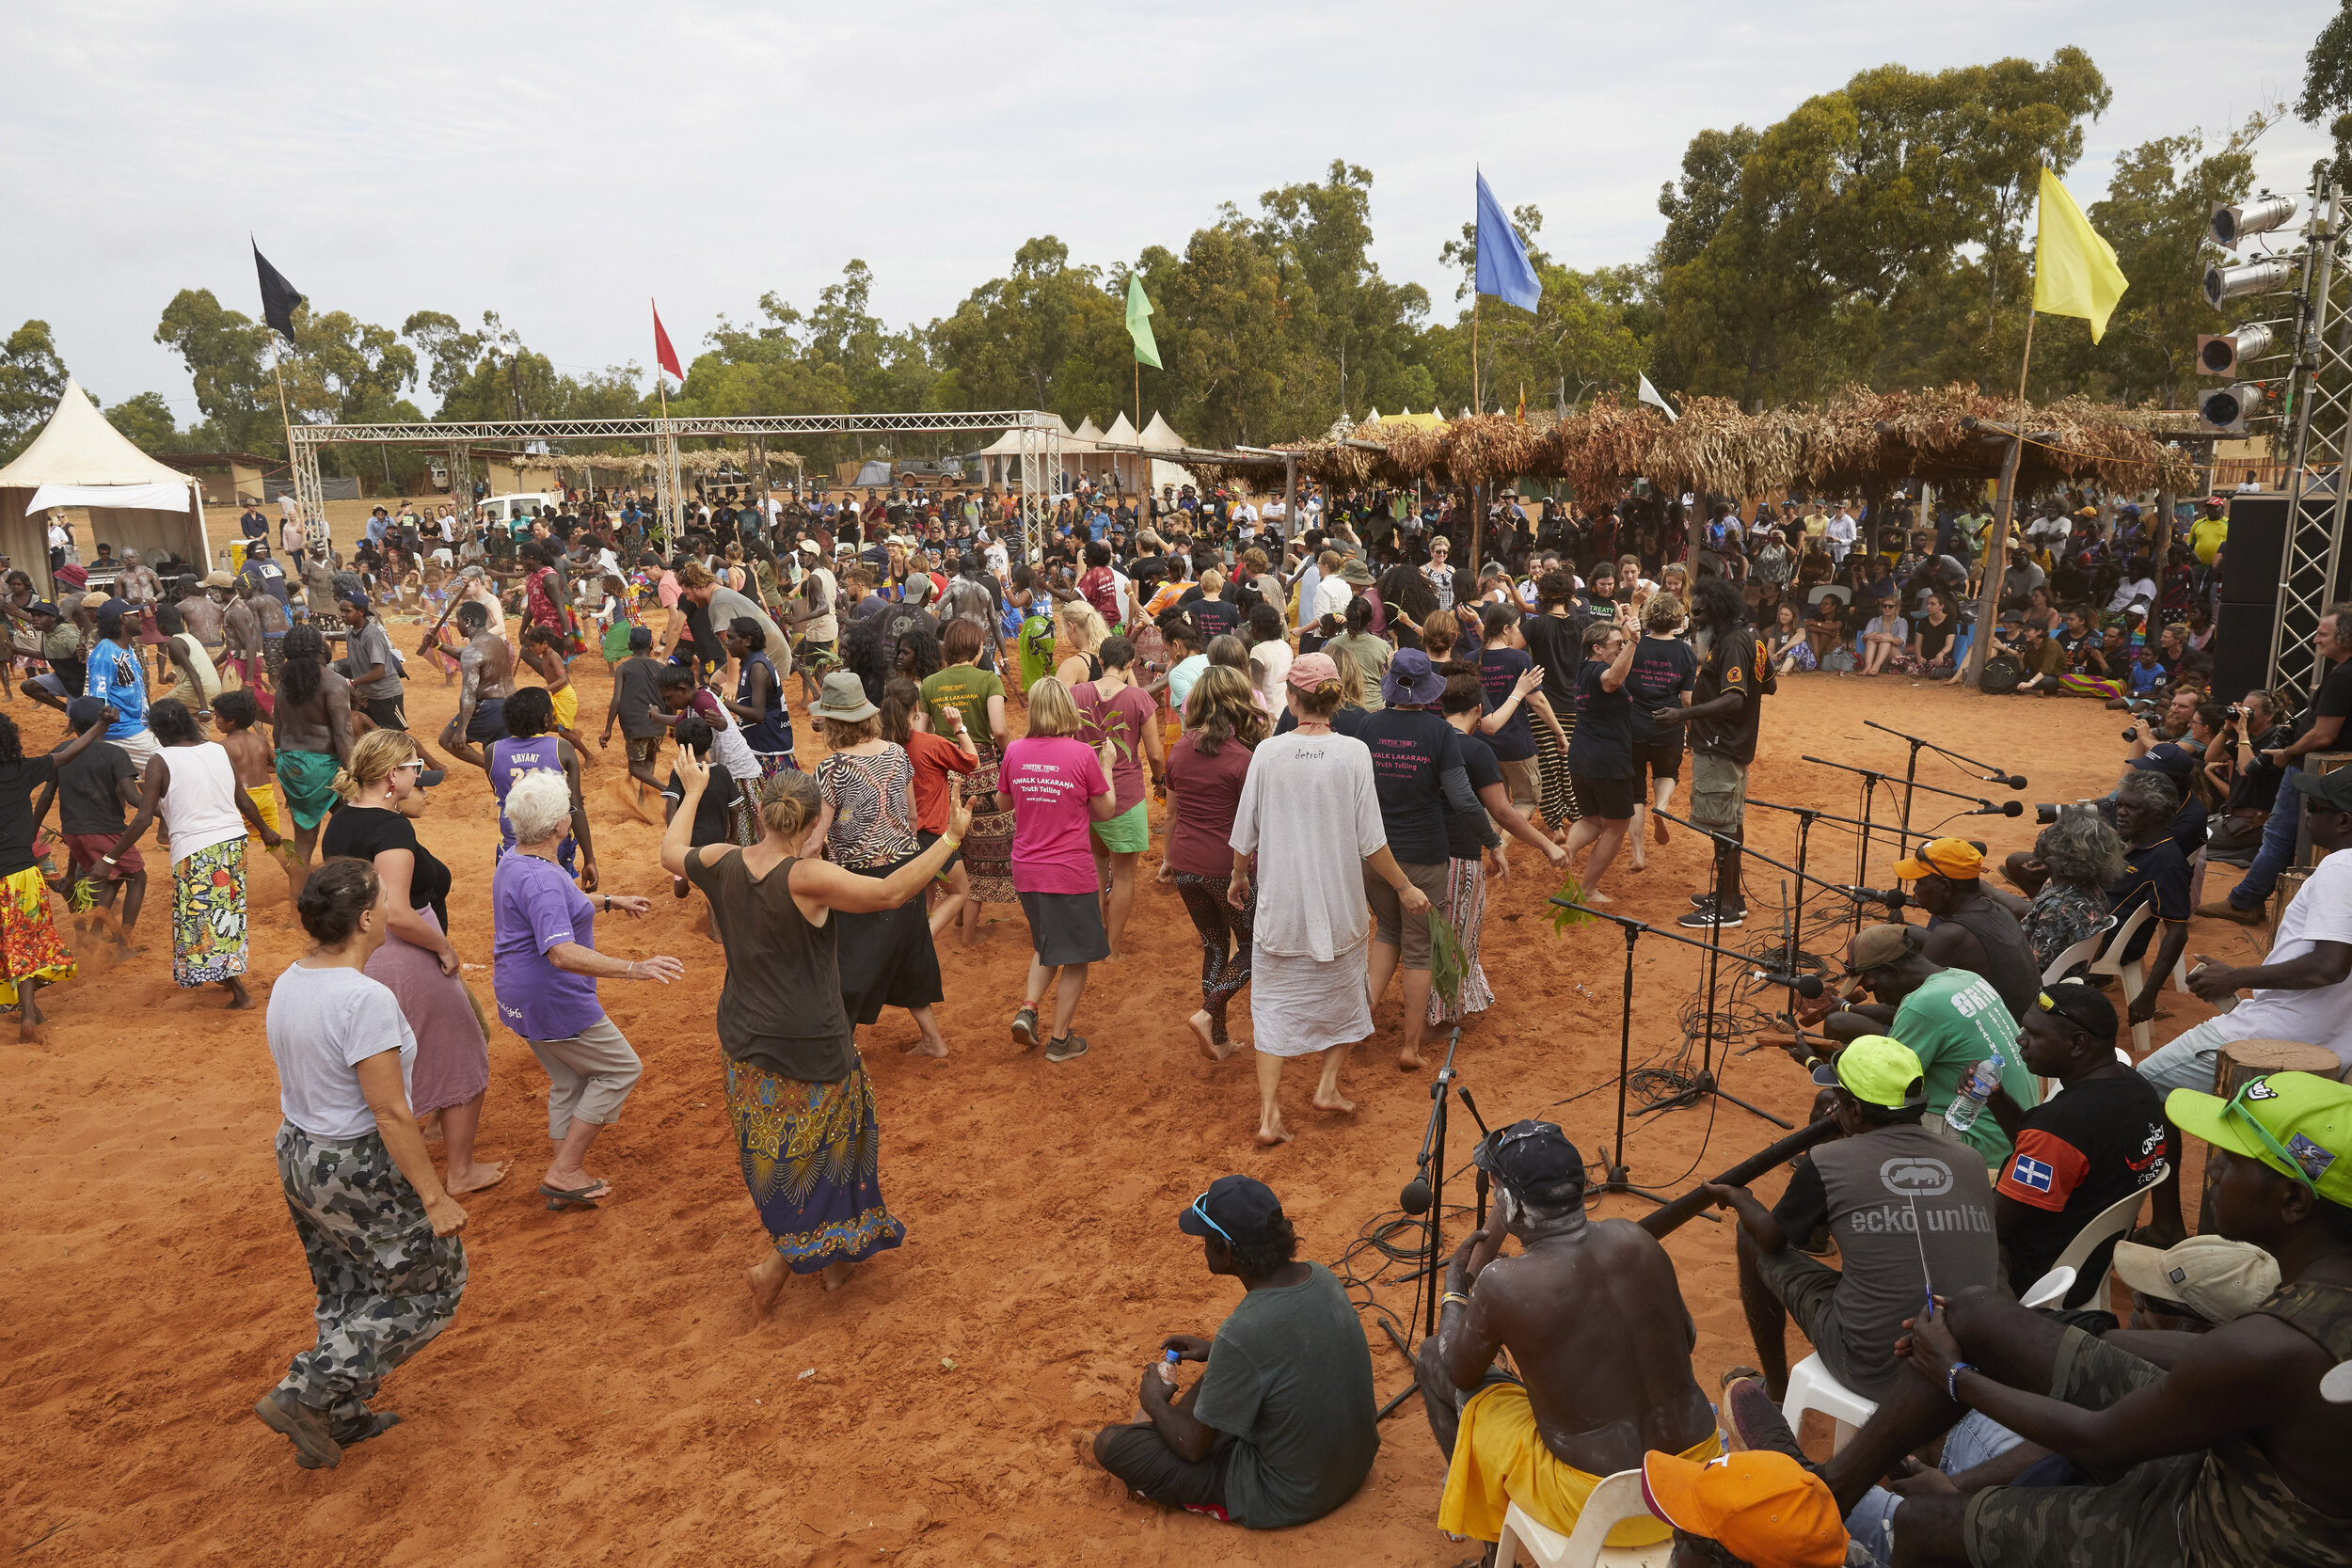  The afternoon  bunggul  (traditional dance) is a highlight of Garma, with guests often invited to join in on the celebrations. 